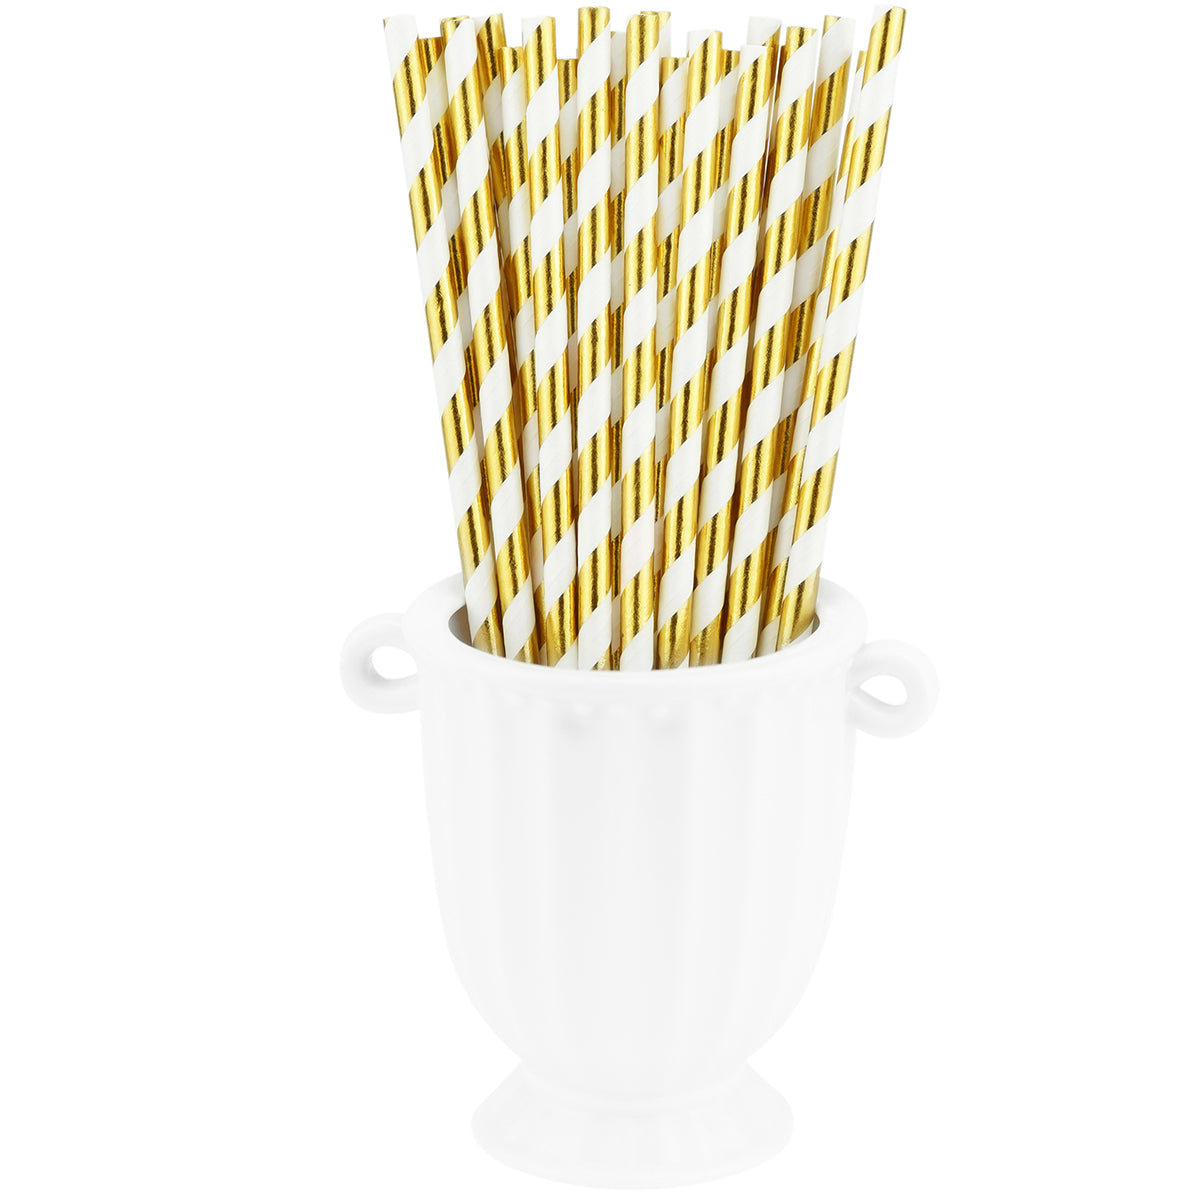 Multi Color Aluminum Straws. 4 Pack (Silver, Gold, Red and Green)